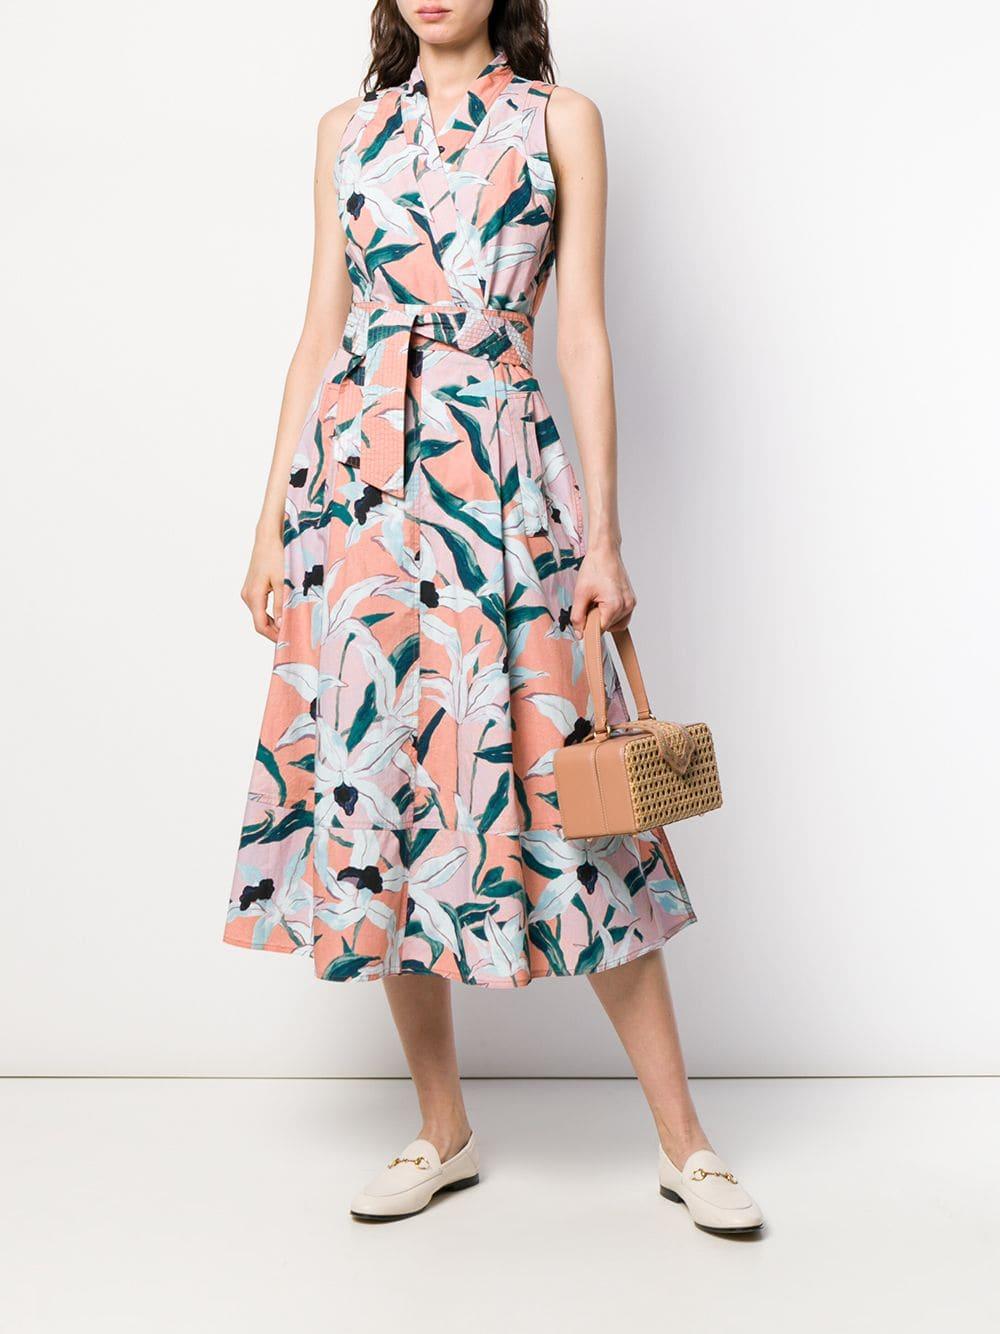 Tory Burch Cotton Floral Print Midi Dress in Pink - Lyst